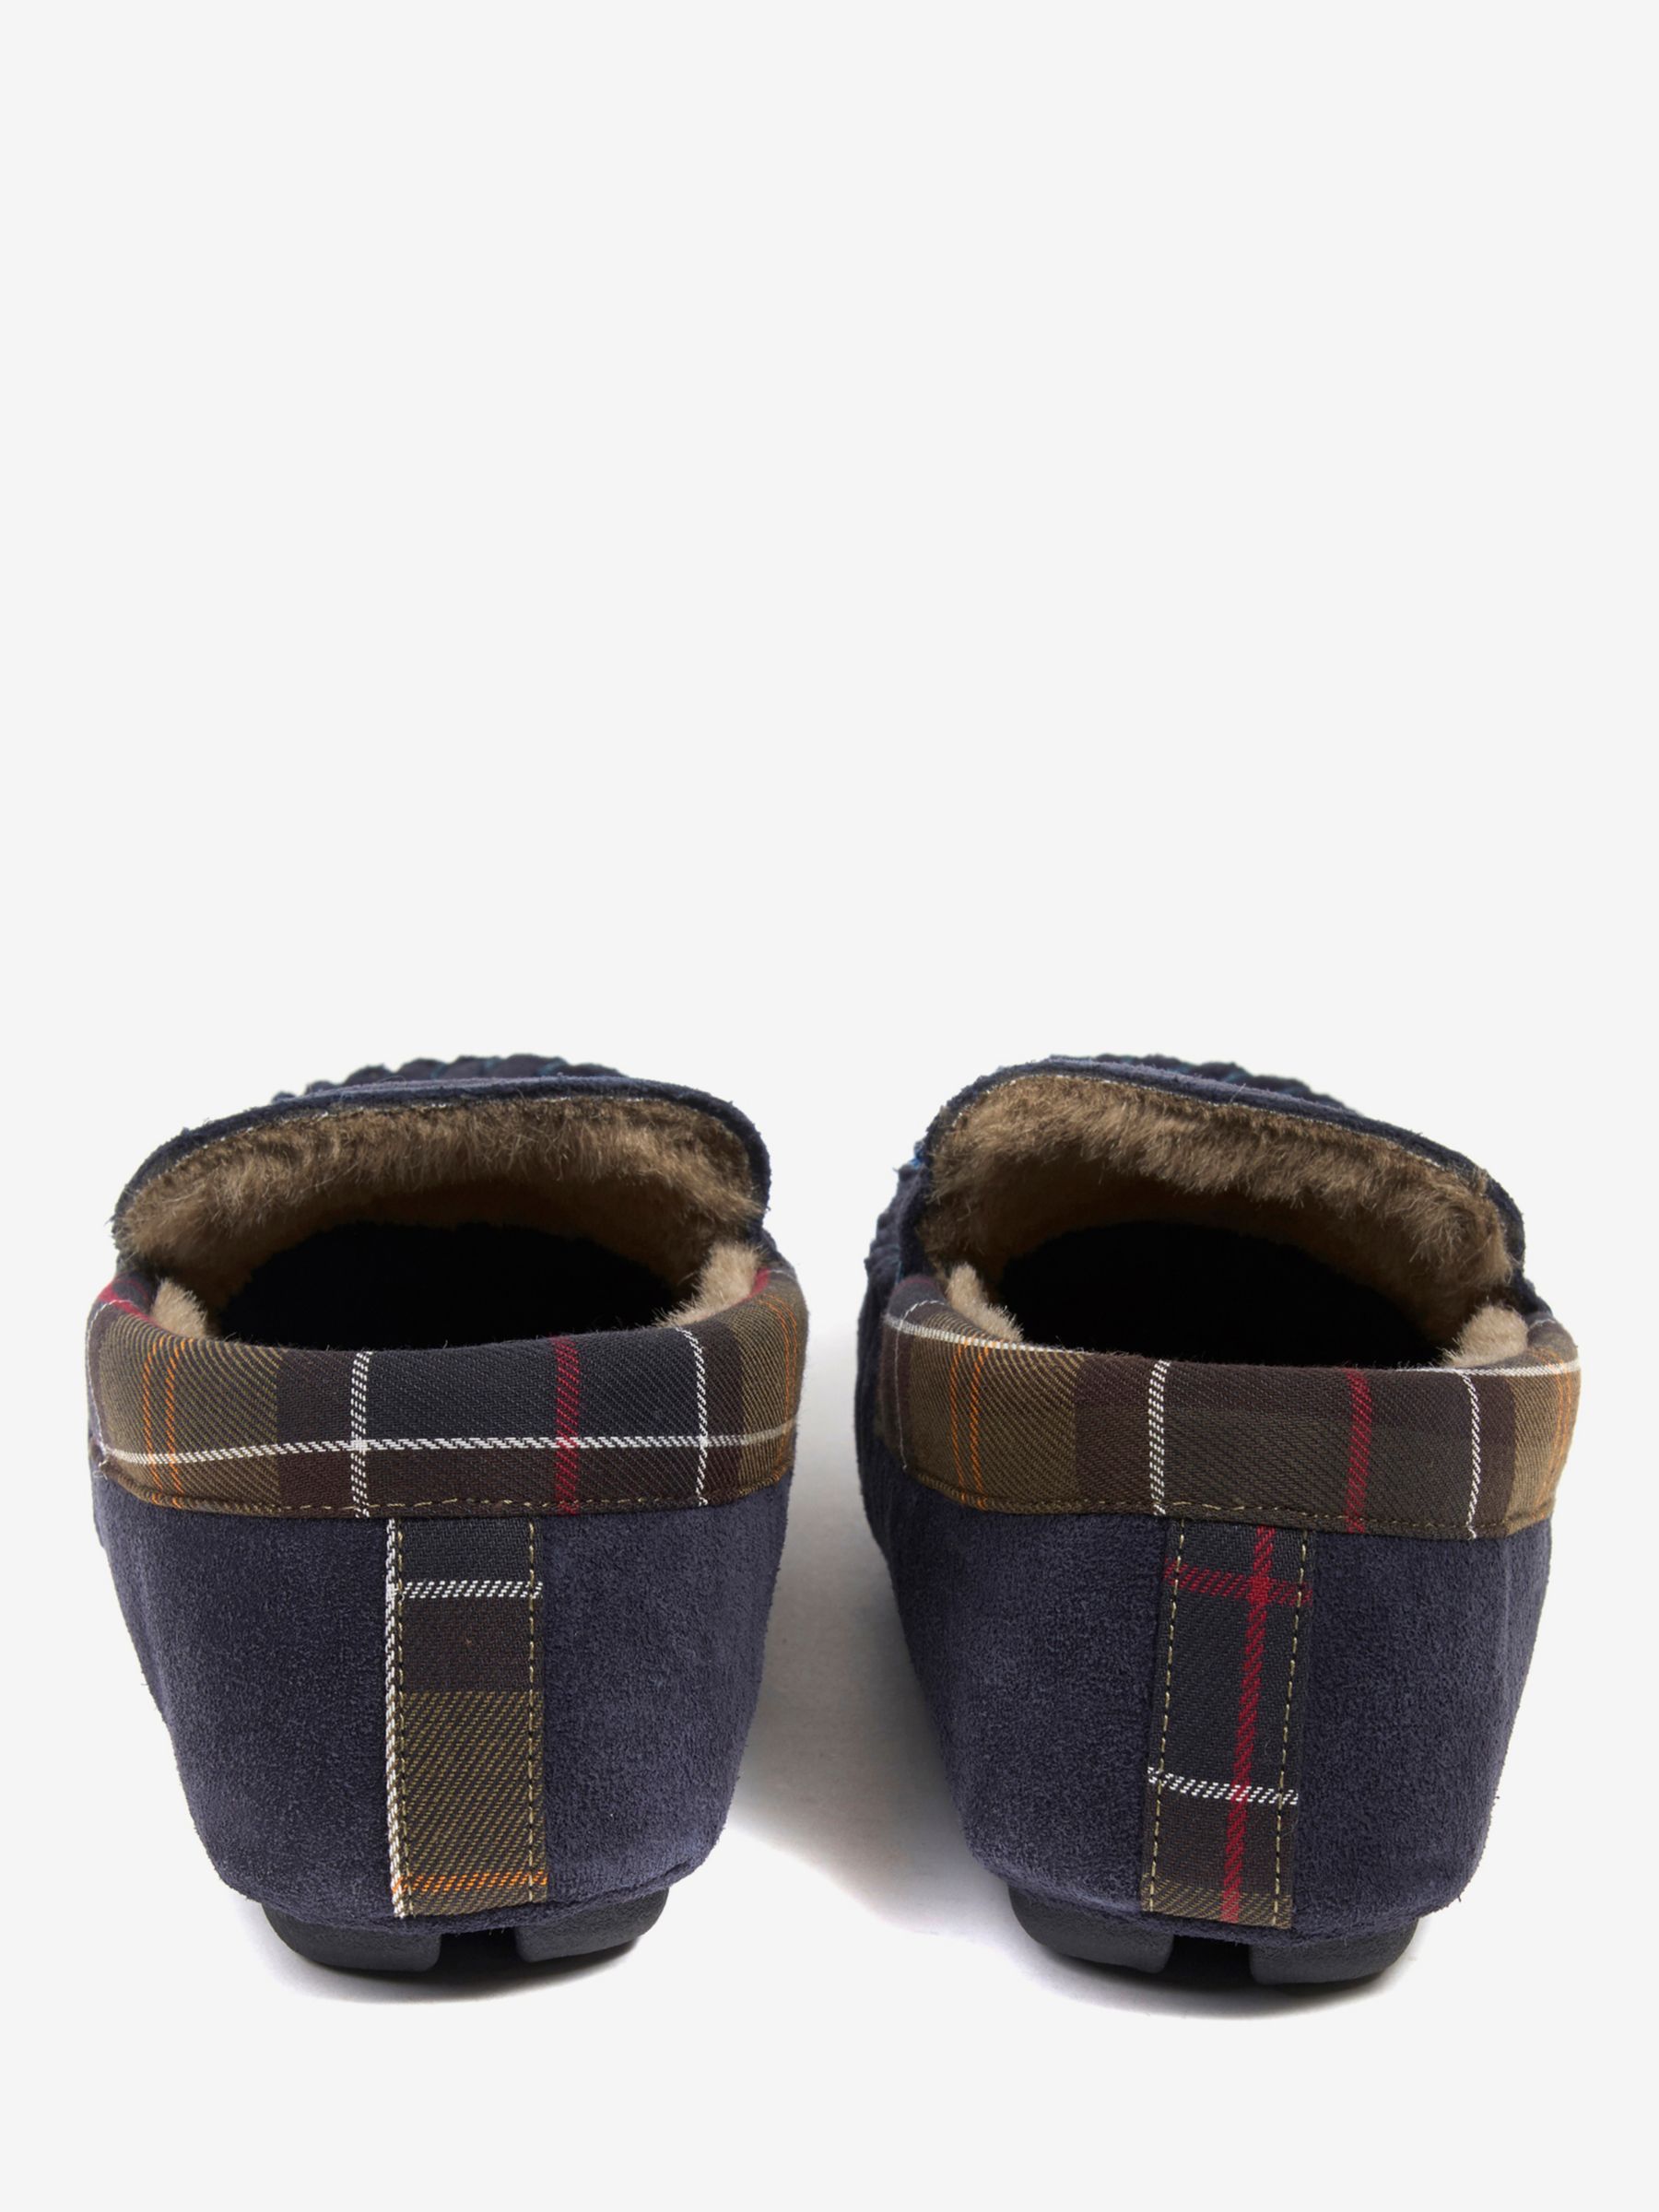 john lewis barbour monty slippers 